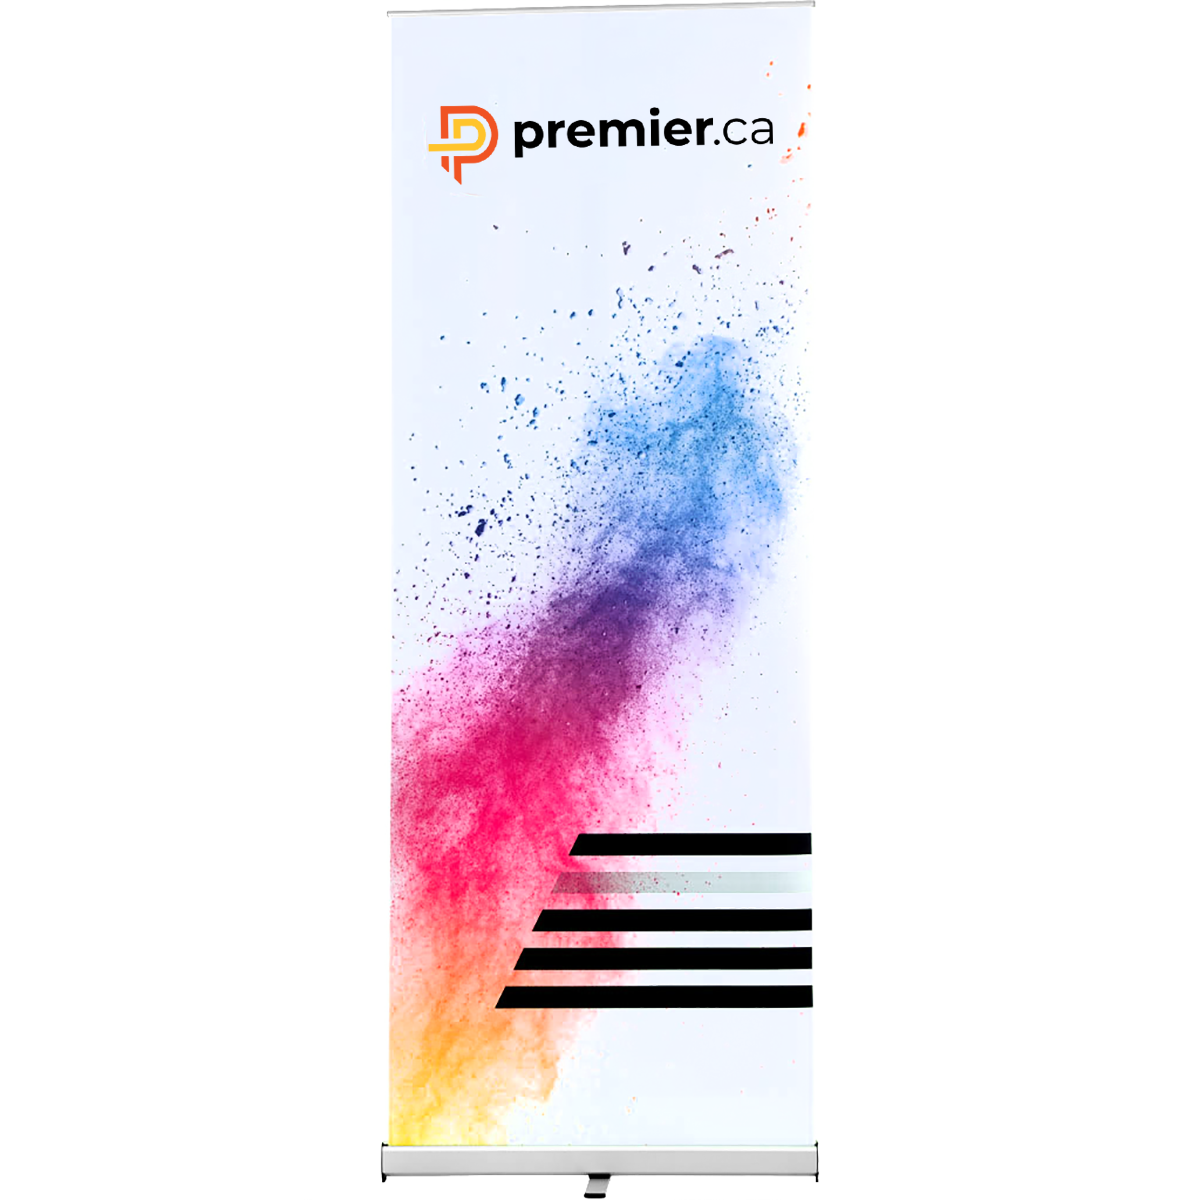 Premier manufactures and sells vibrant dye sublimated display products